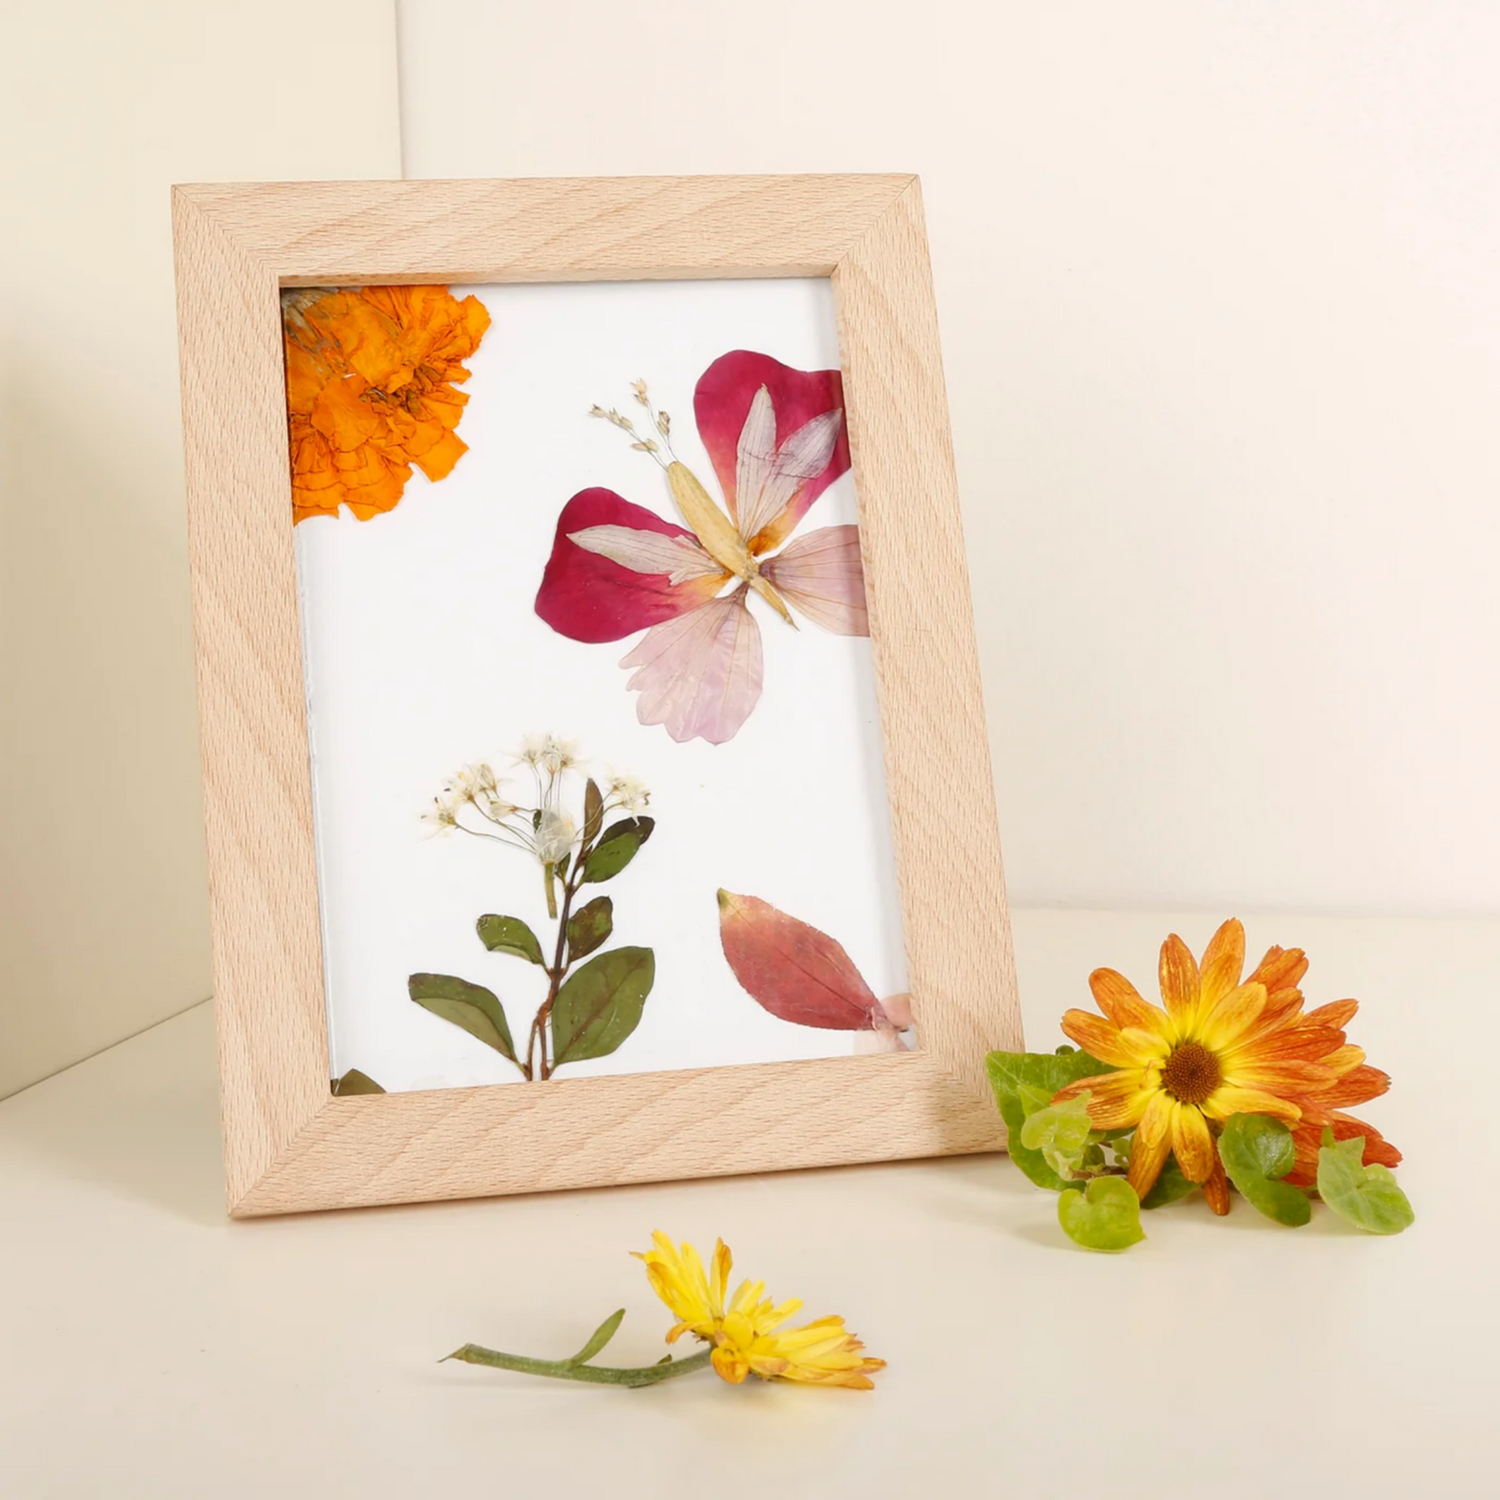 Make Your Own Pressed Flower Frame Art – New Orleans Museum of Art Shop